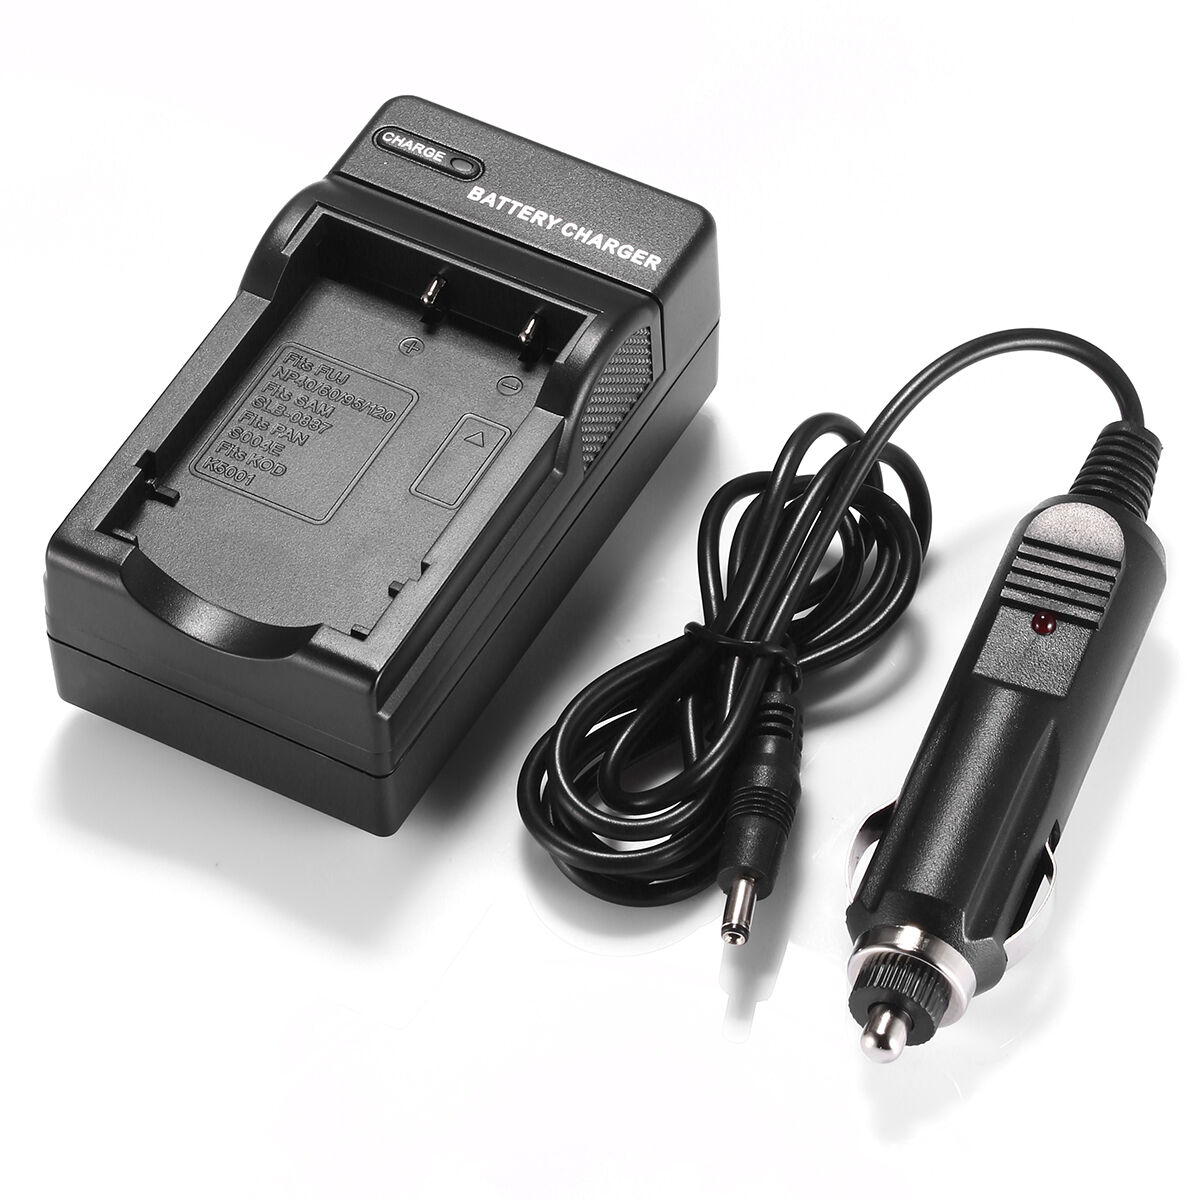 SONY Xacti VPC-TH1 battery charger